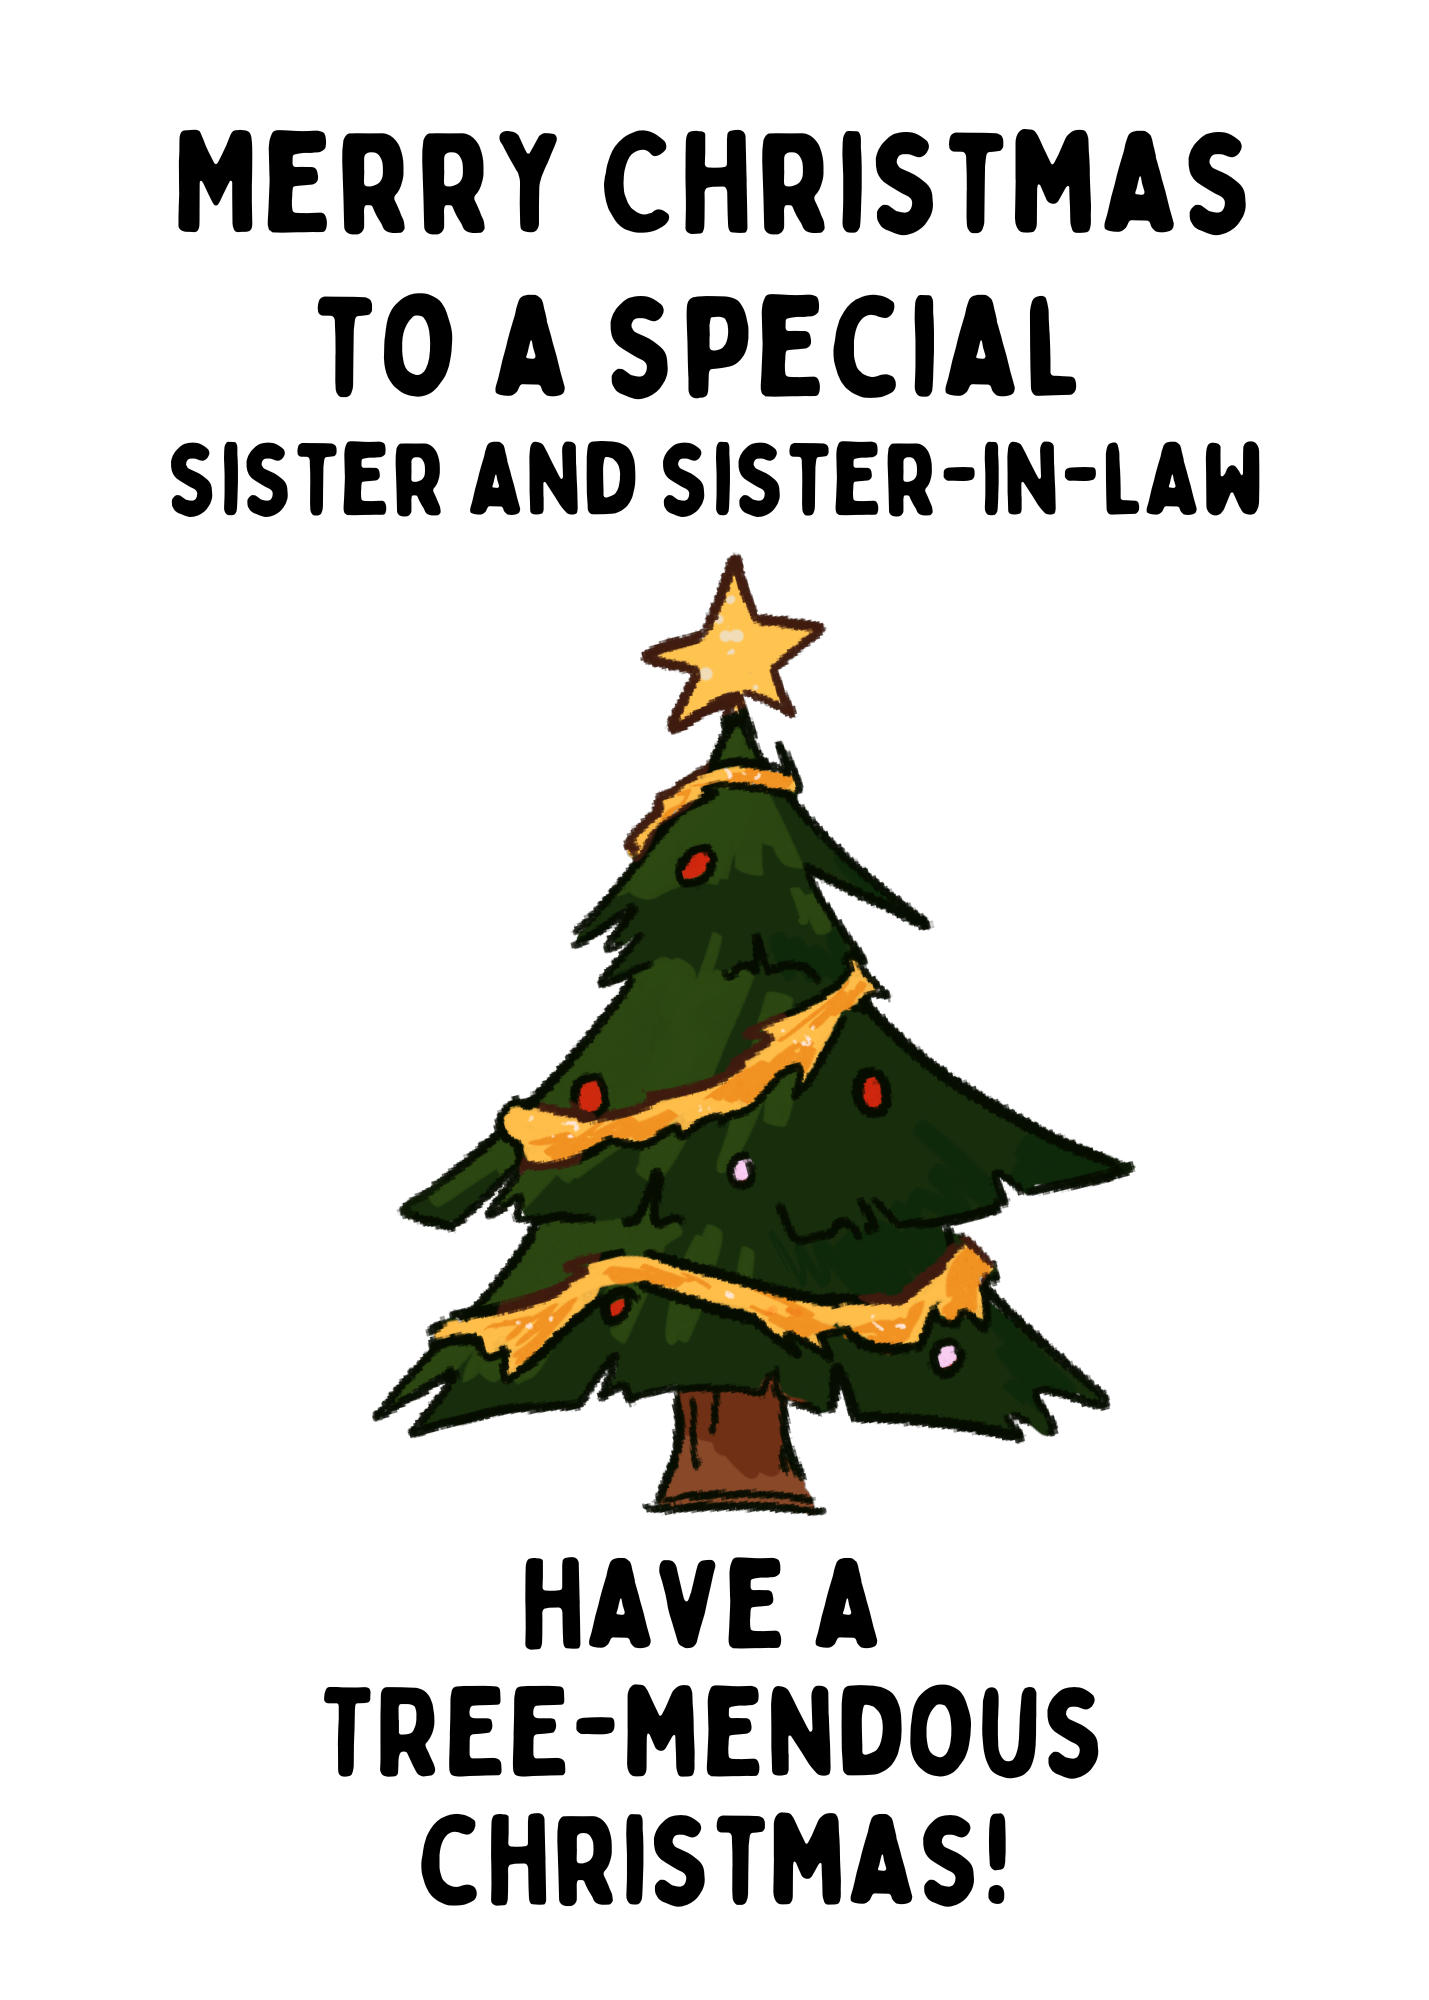 Sister and Sister-in-law Christmas Card